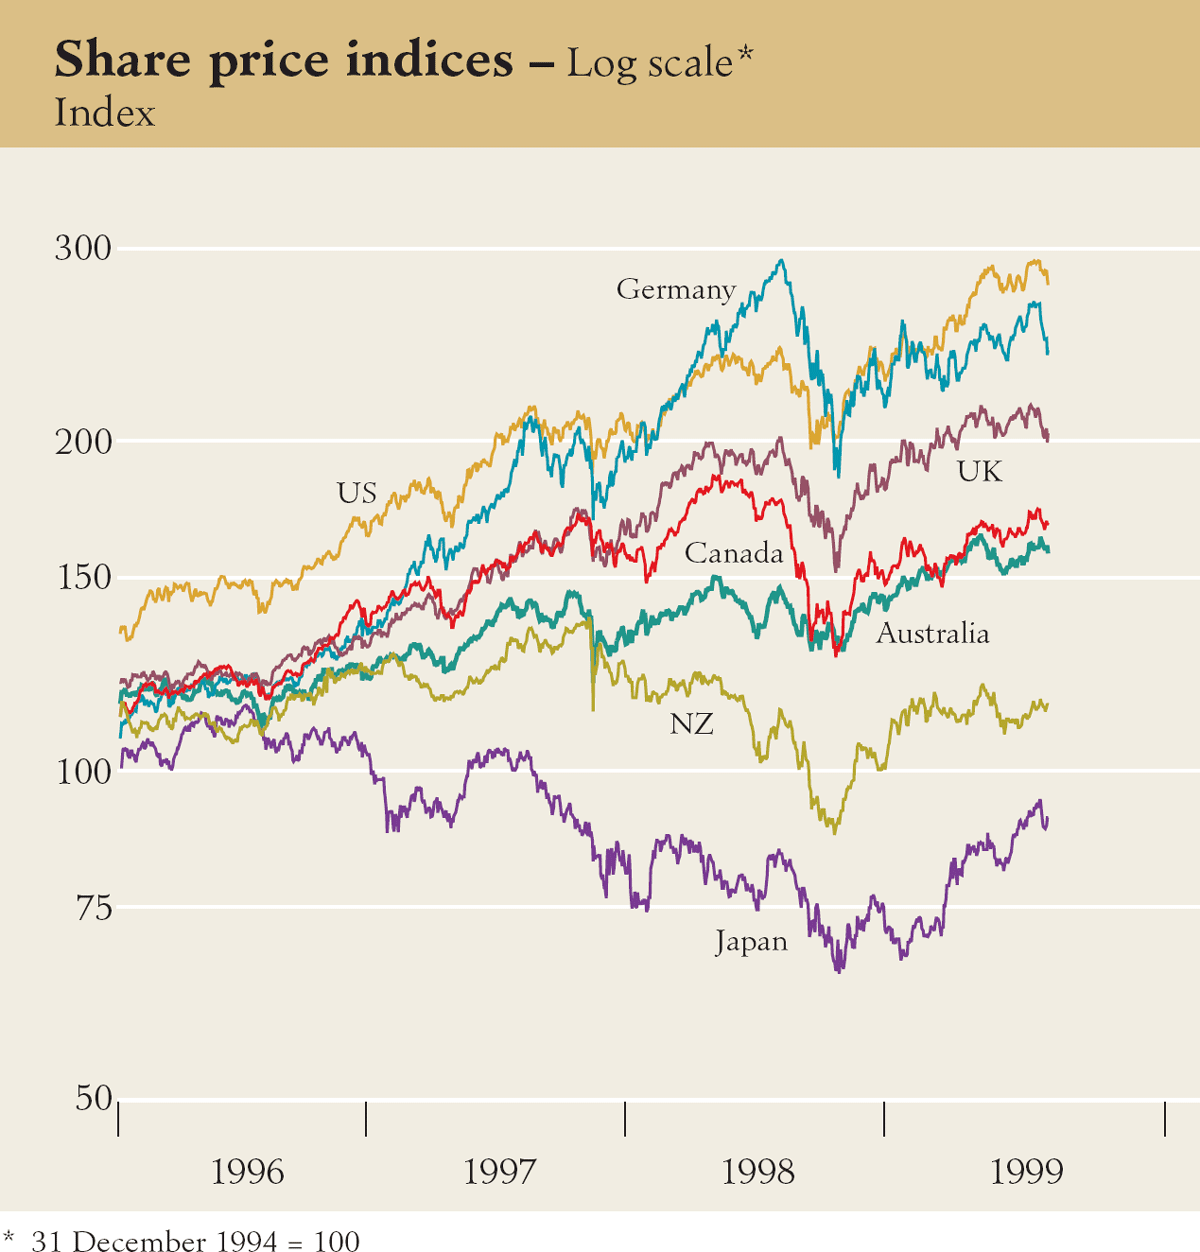 Graph showing Share price indices